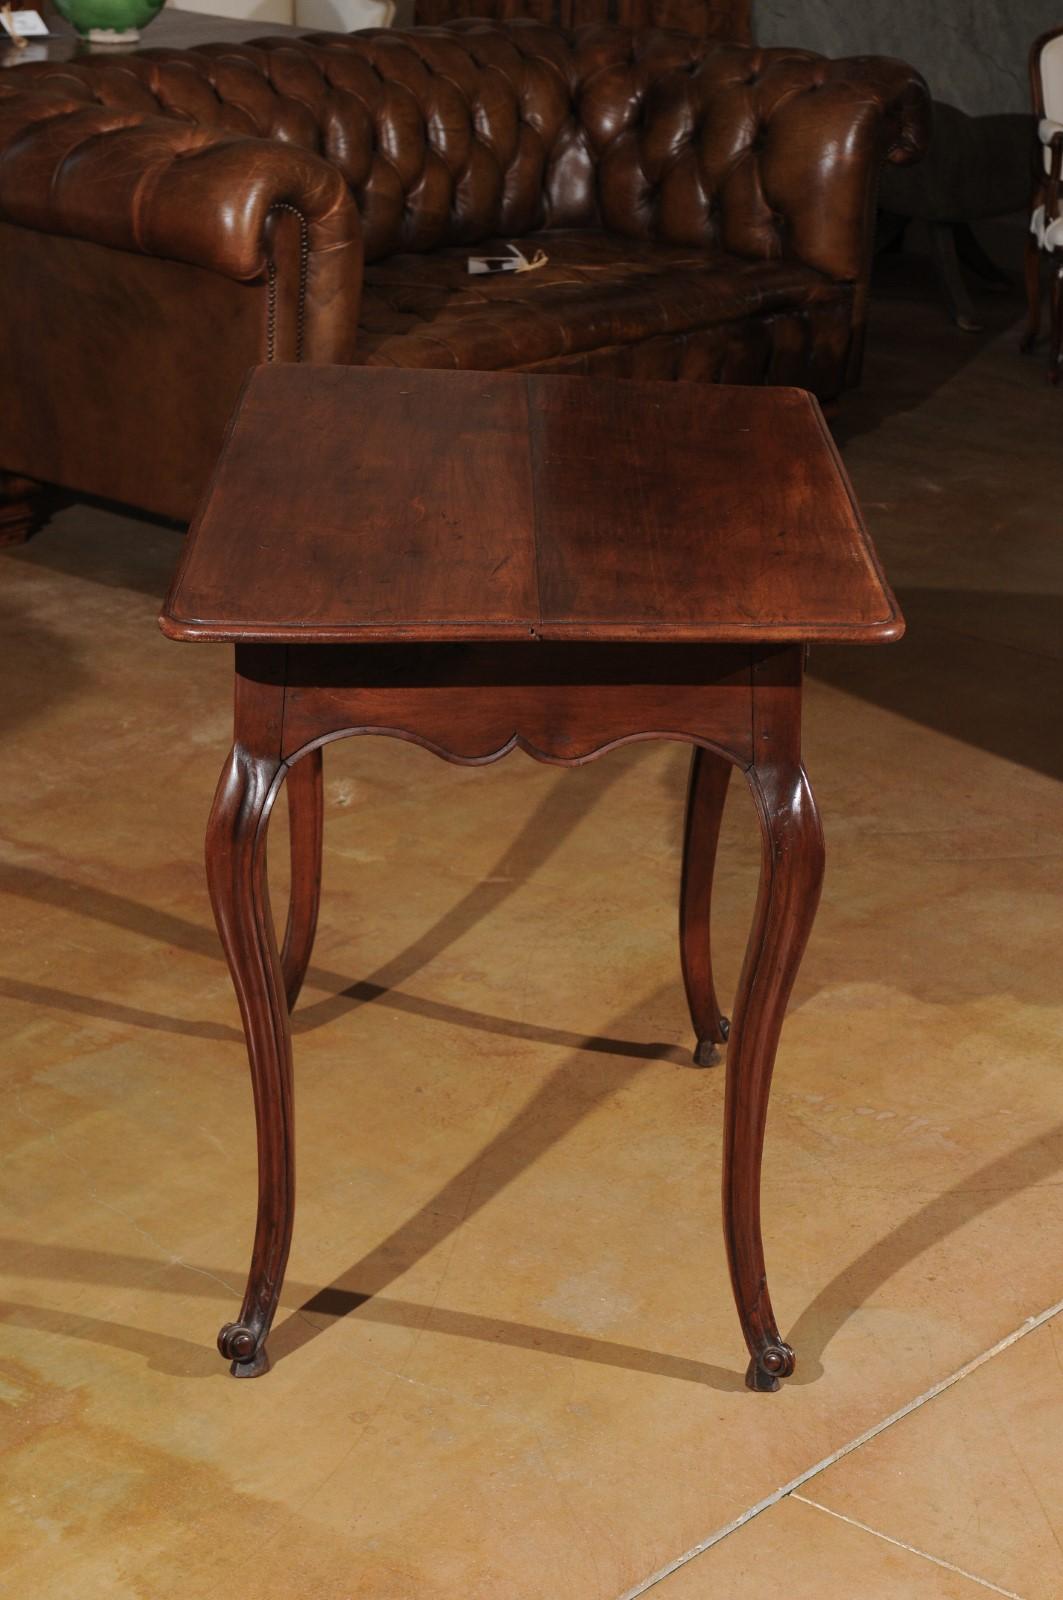 A French Louis XV period side table in solid walnut from the late 18th century, with single drawer, X-form fretted motifs, scalloped apron and cabriole legs. This French side table features a rectangular top with molded edges and rounded corners,